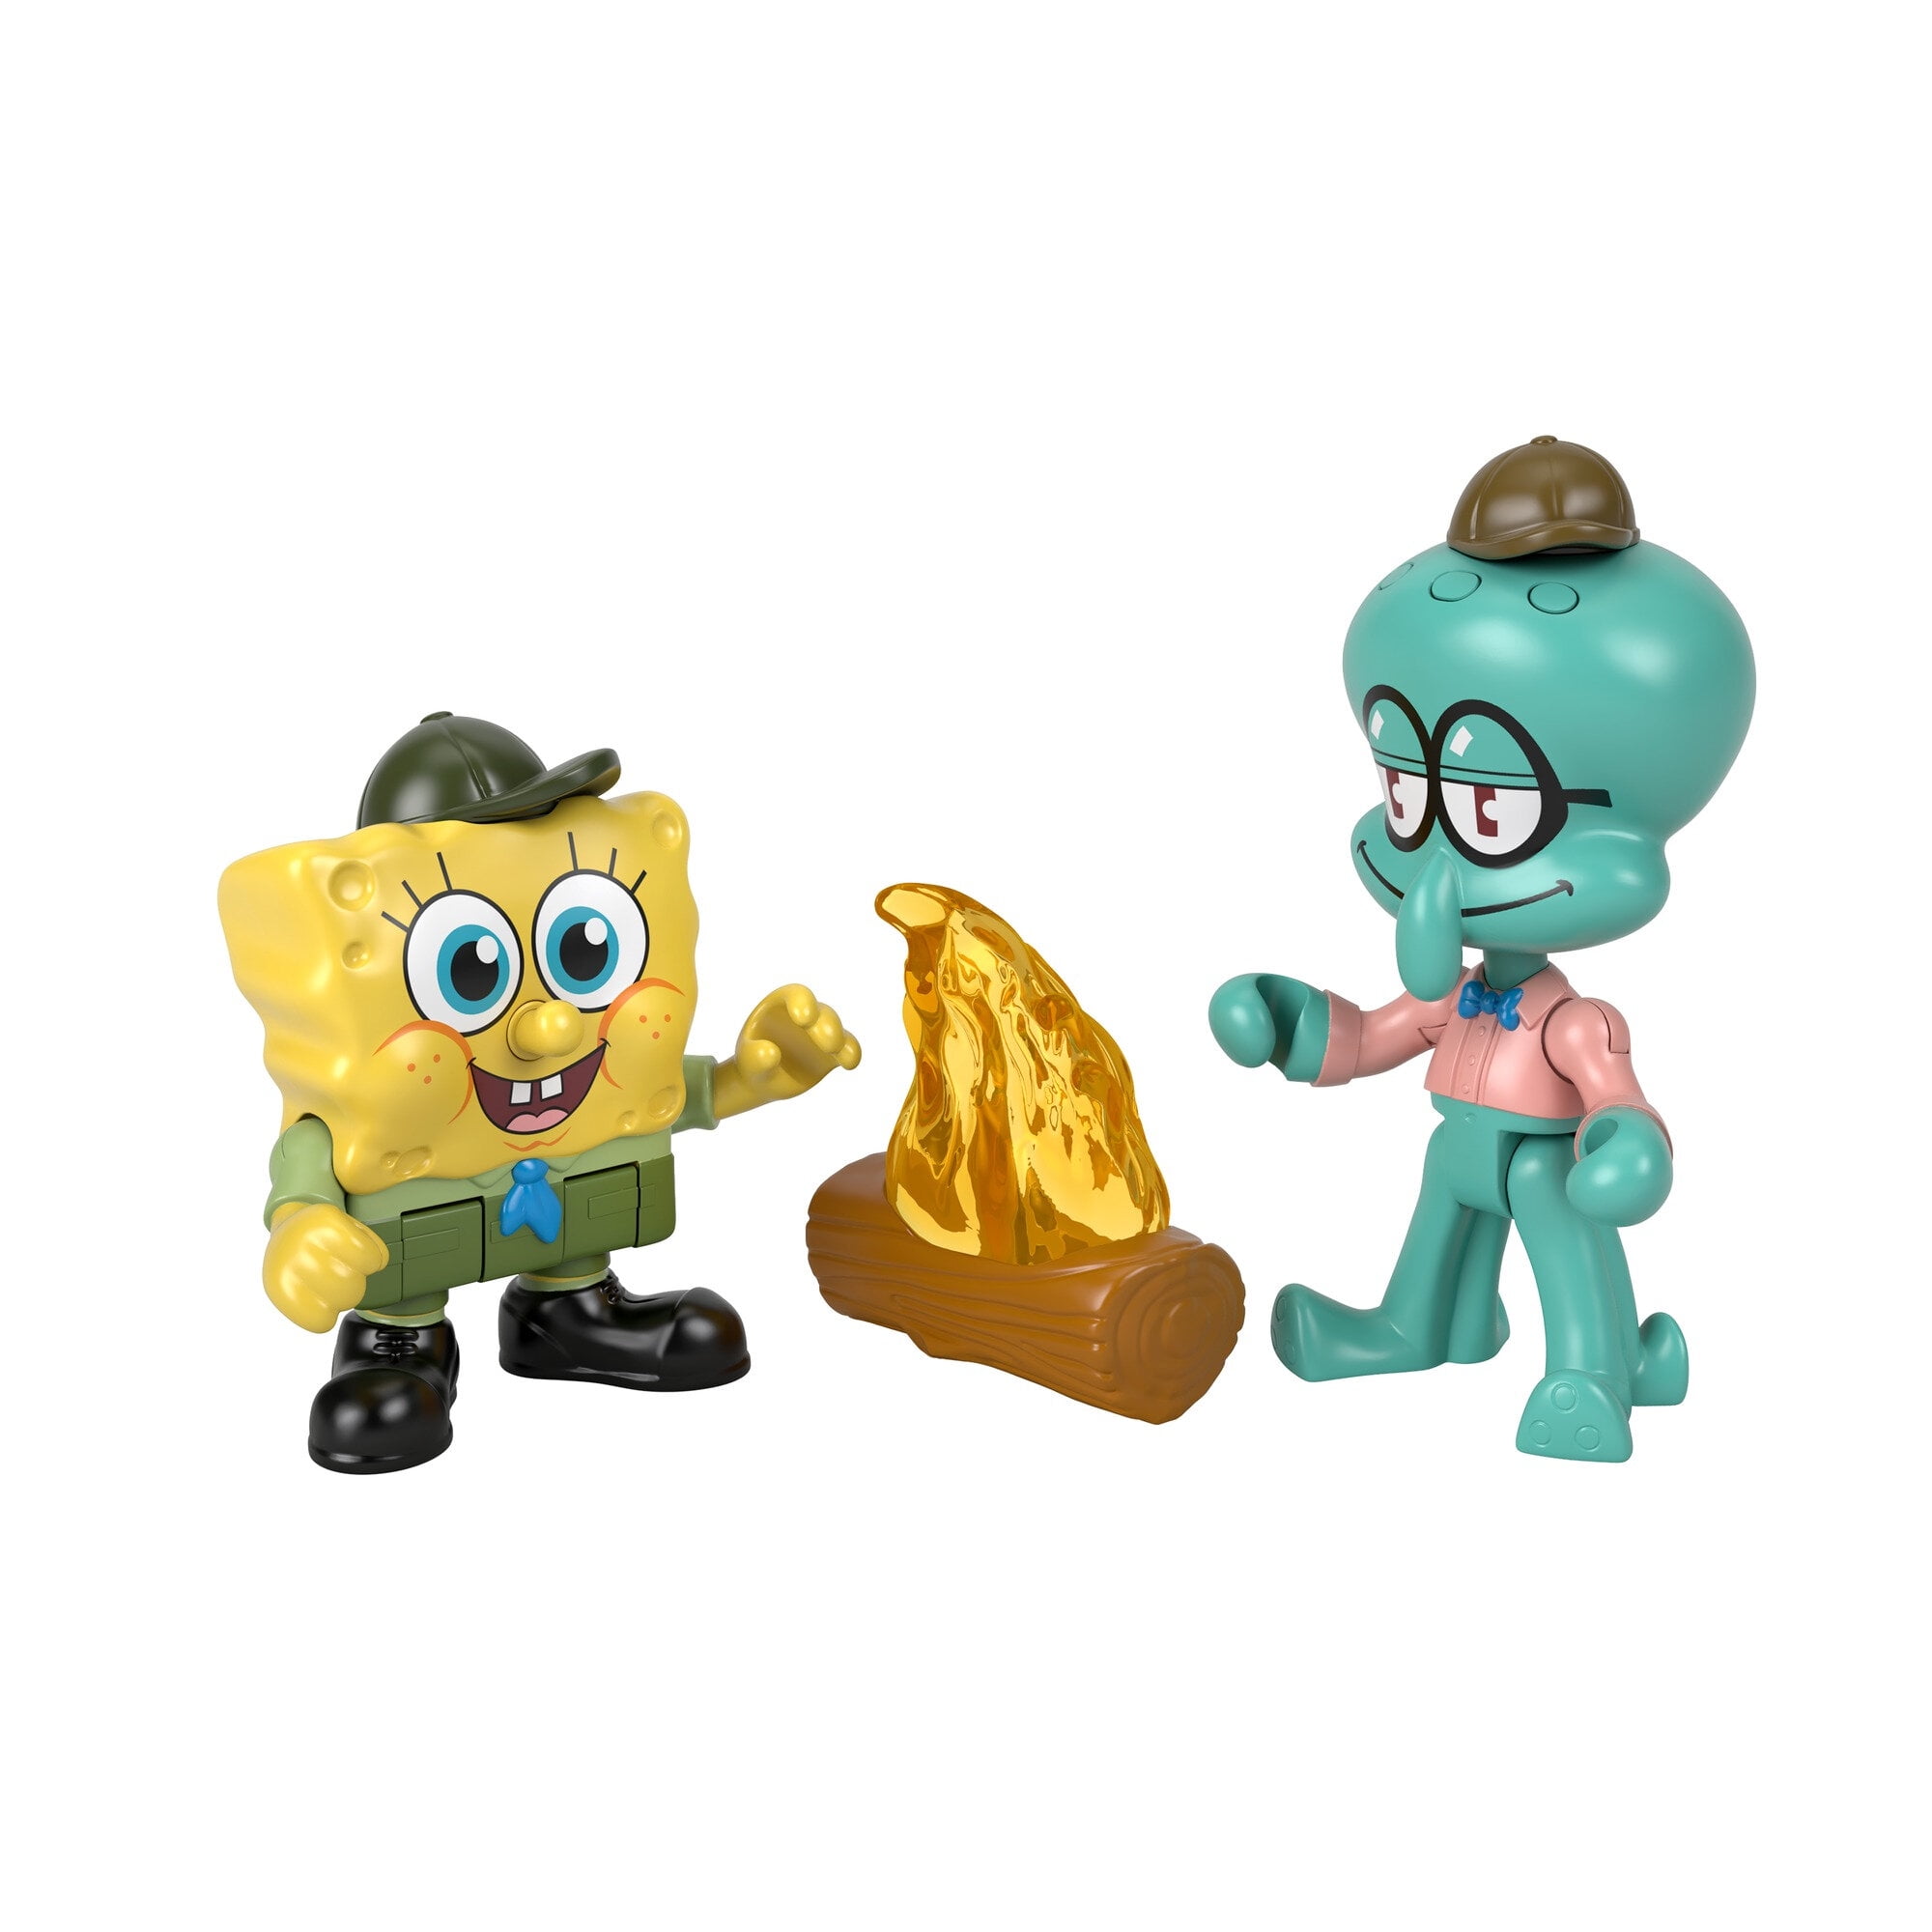 Details about   Spongebob Squarepants Imaginext Camp Coral New in Box playset Movie 